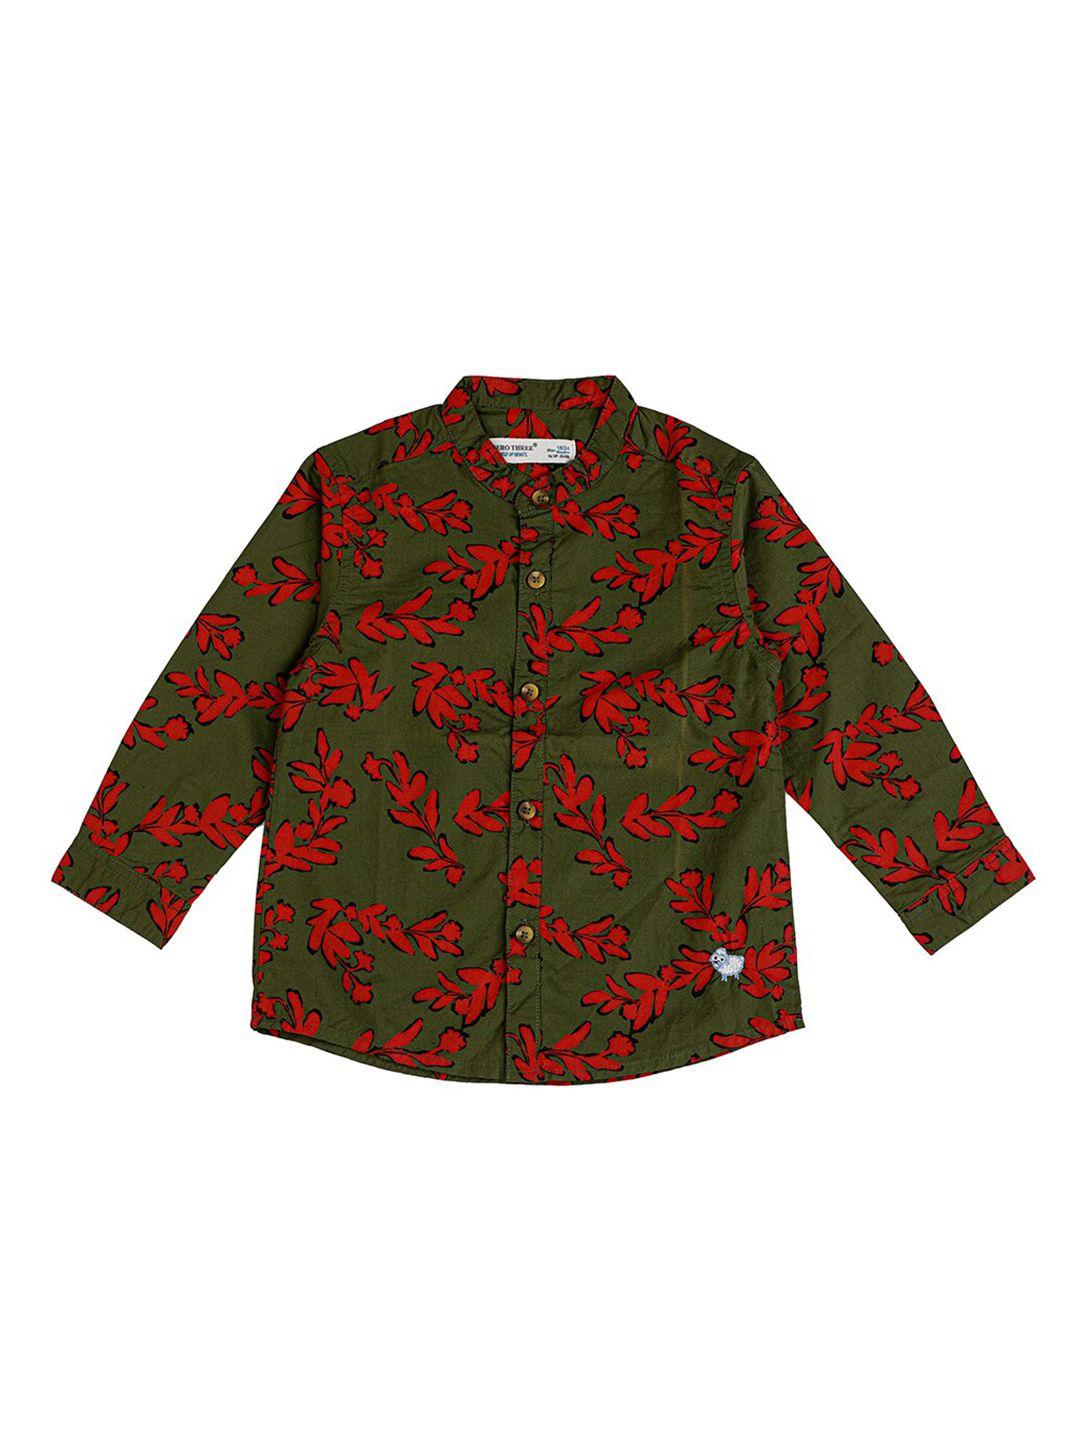 zero three boys olive green & red printed casual shirt